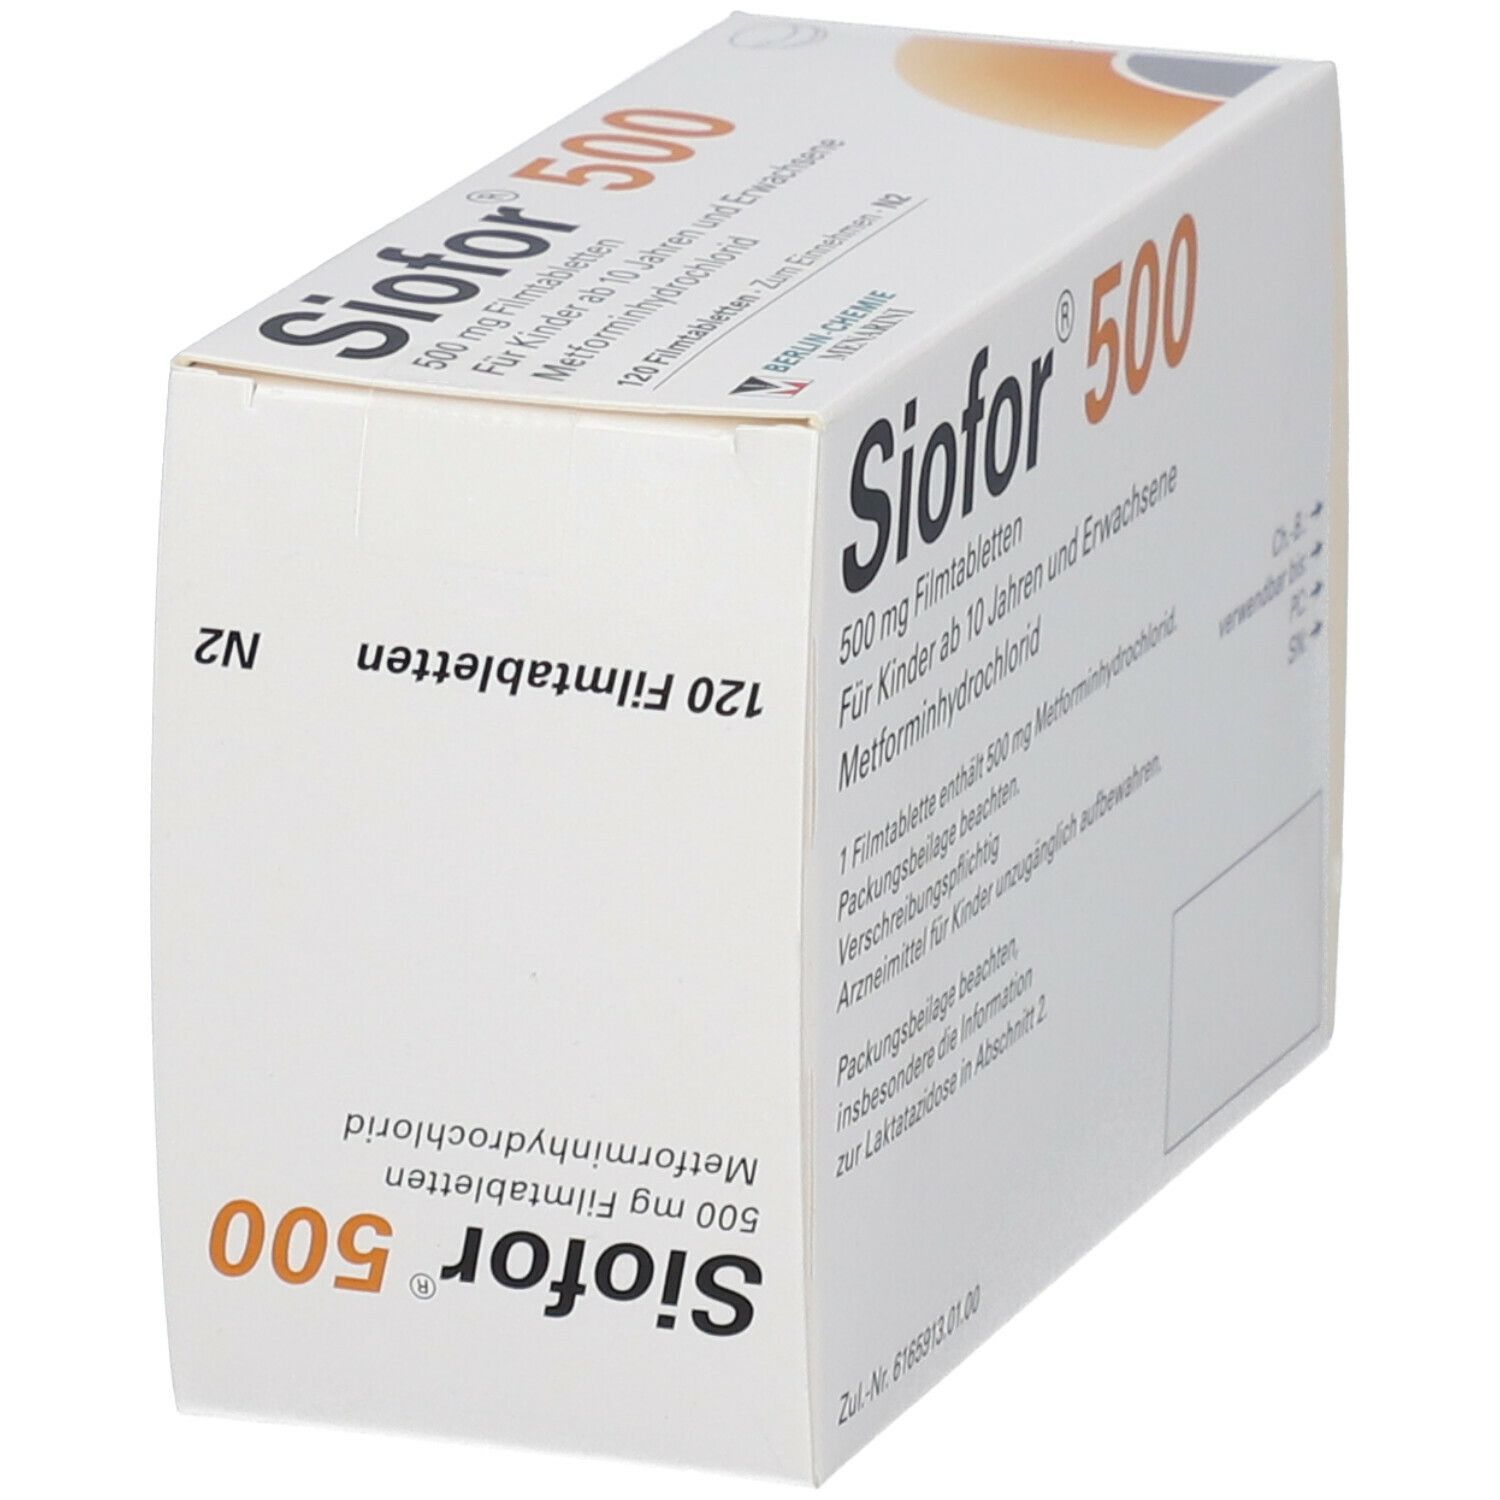 Siofor® 500